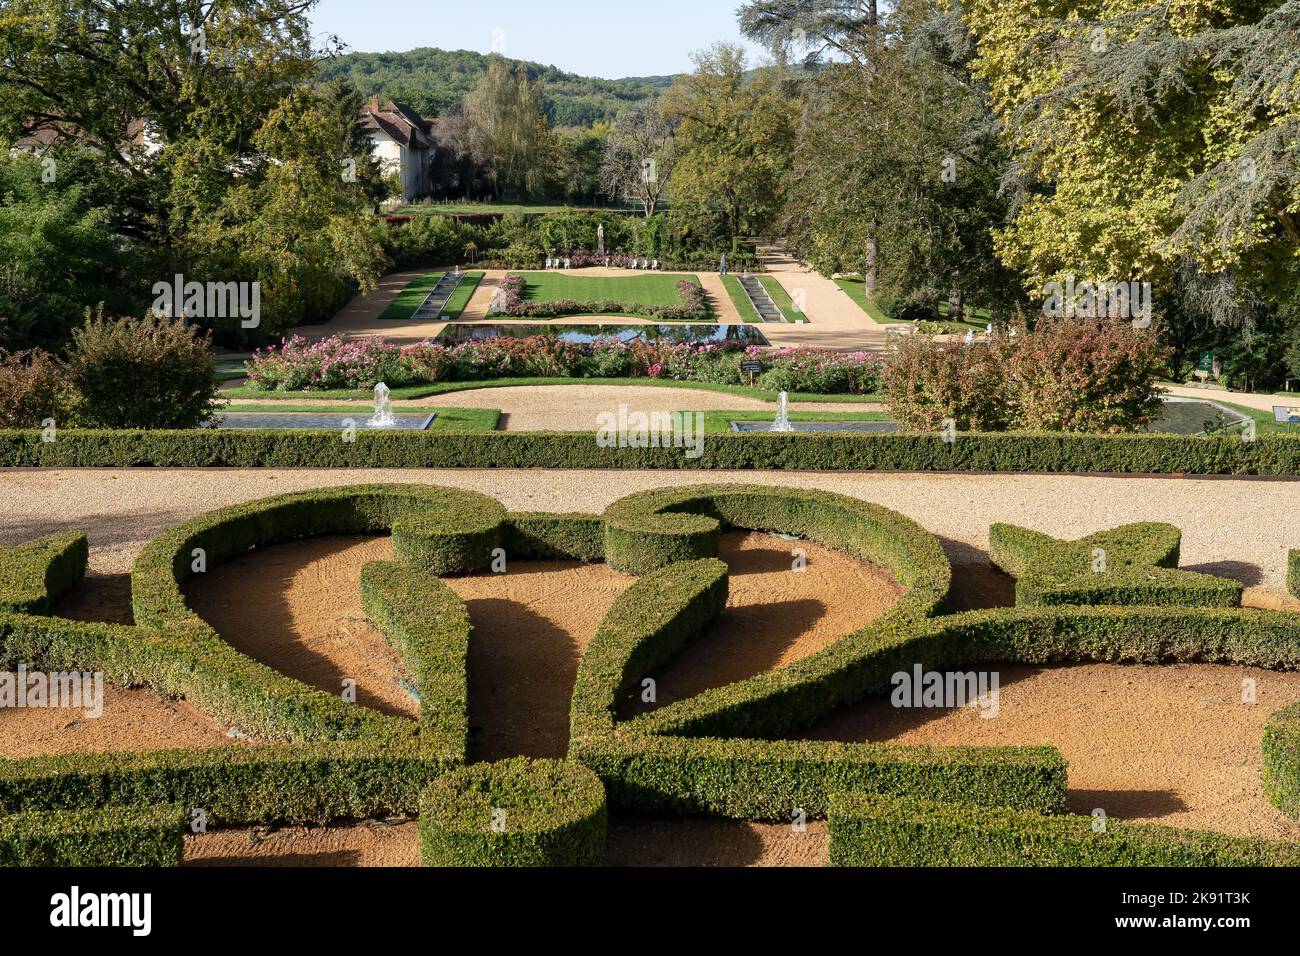 a designer garden with topiary hedges and flower borders, Chateau des Milandes, former home of Josephine Baker, Dordogne France Stock Photo